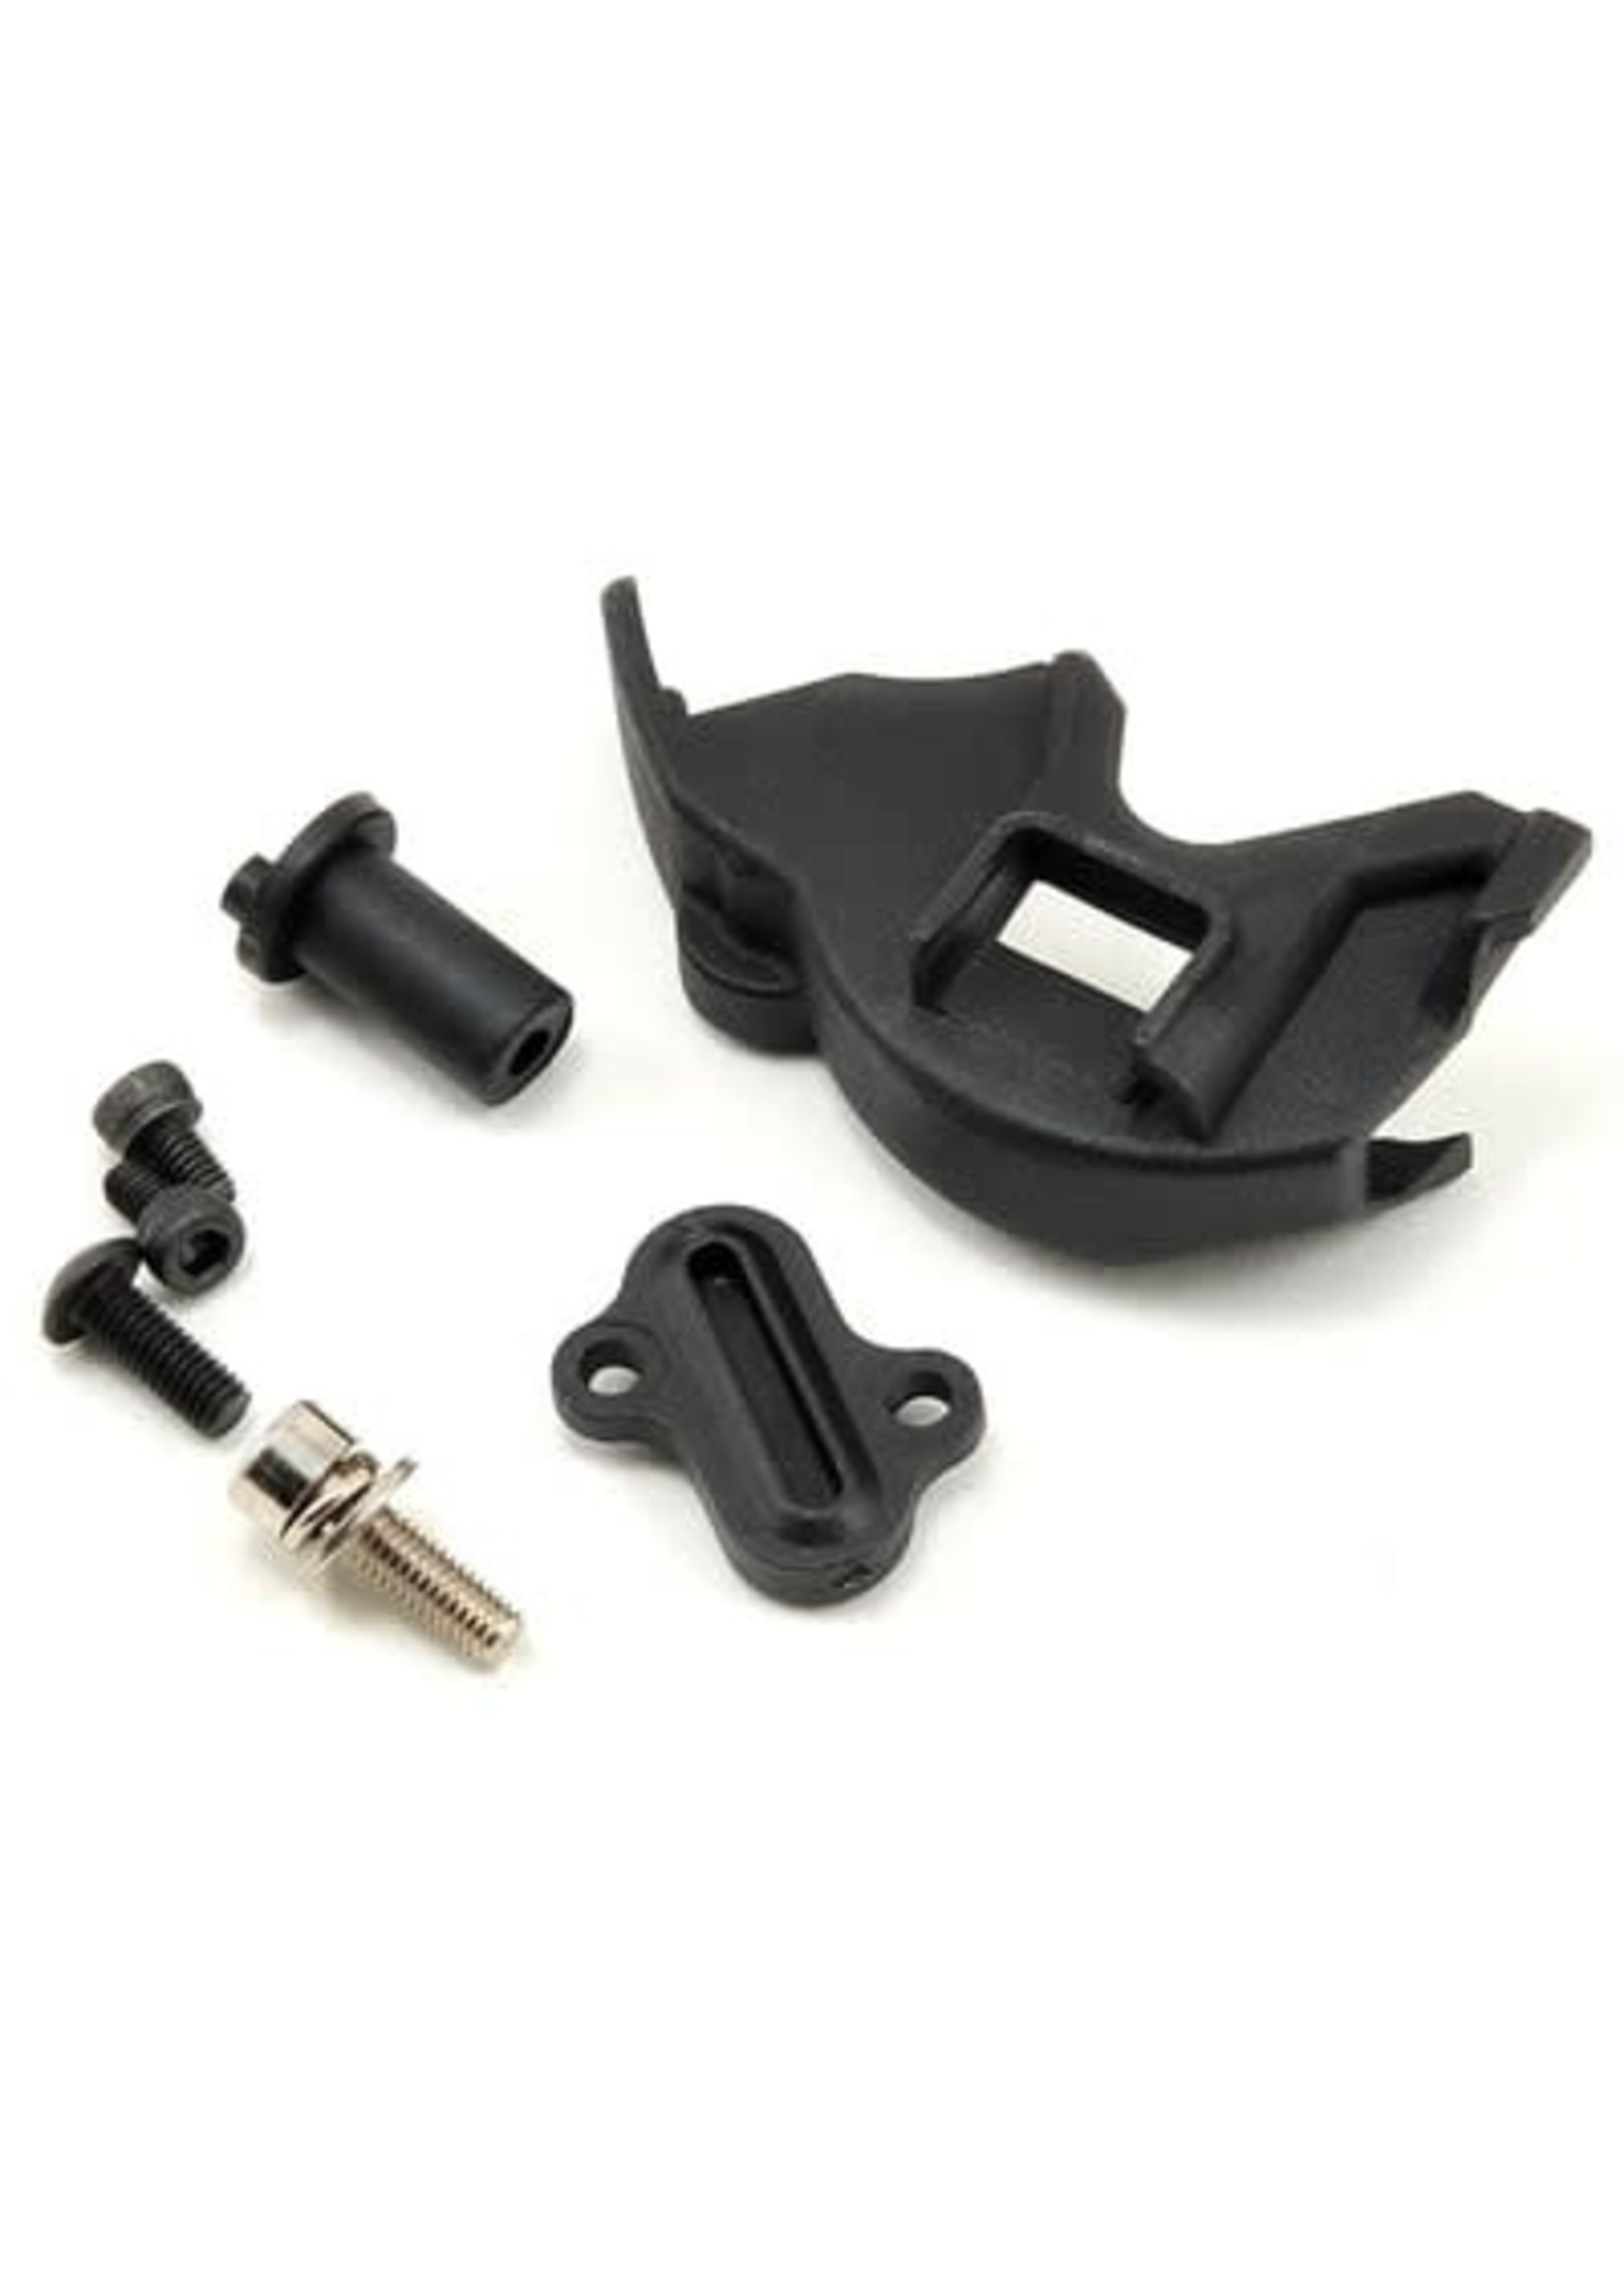 Traxxas 7379R Cover, gear/motor plate access cover/ motor mount hinge post / 3x10mm CS w/split and flat washers (1) / 2.5x4mm CS (2) / 3x8mm BCS (1) (for 550 motors)